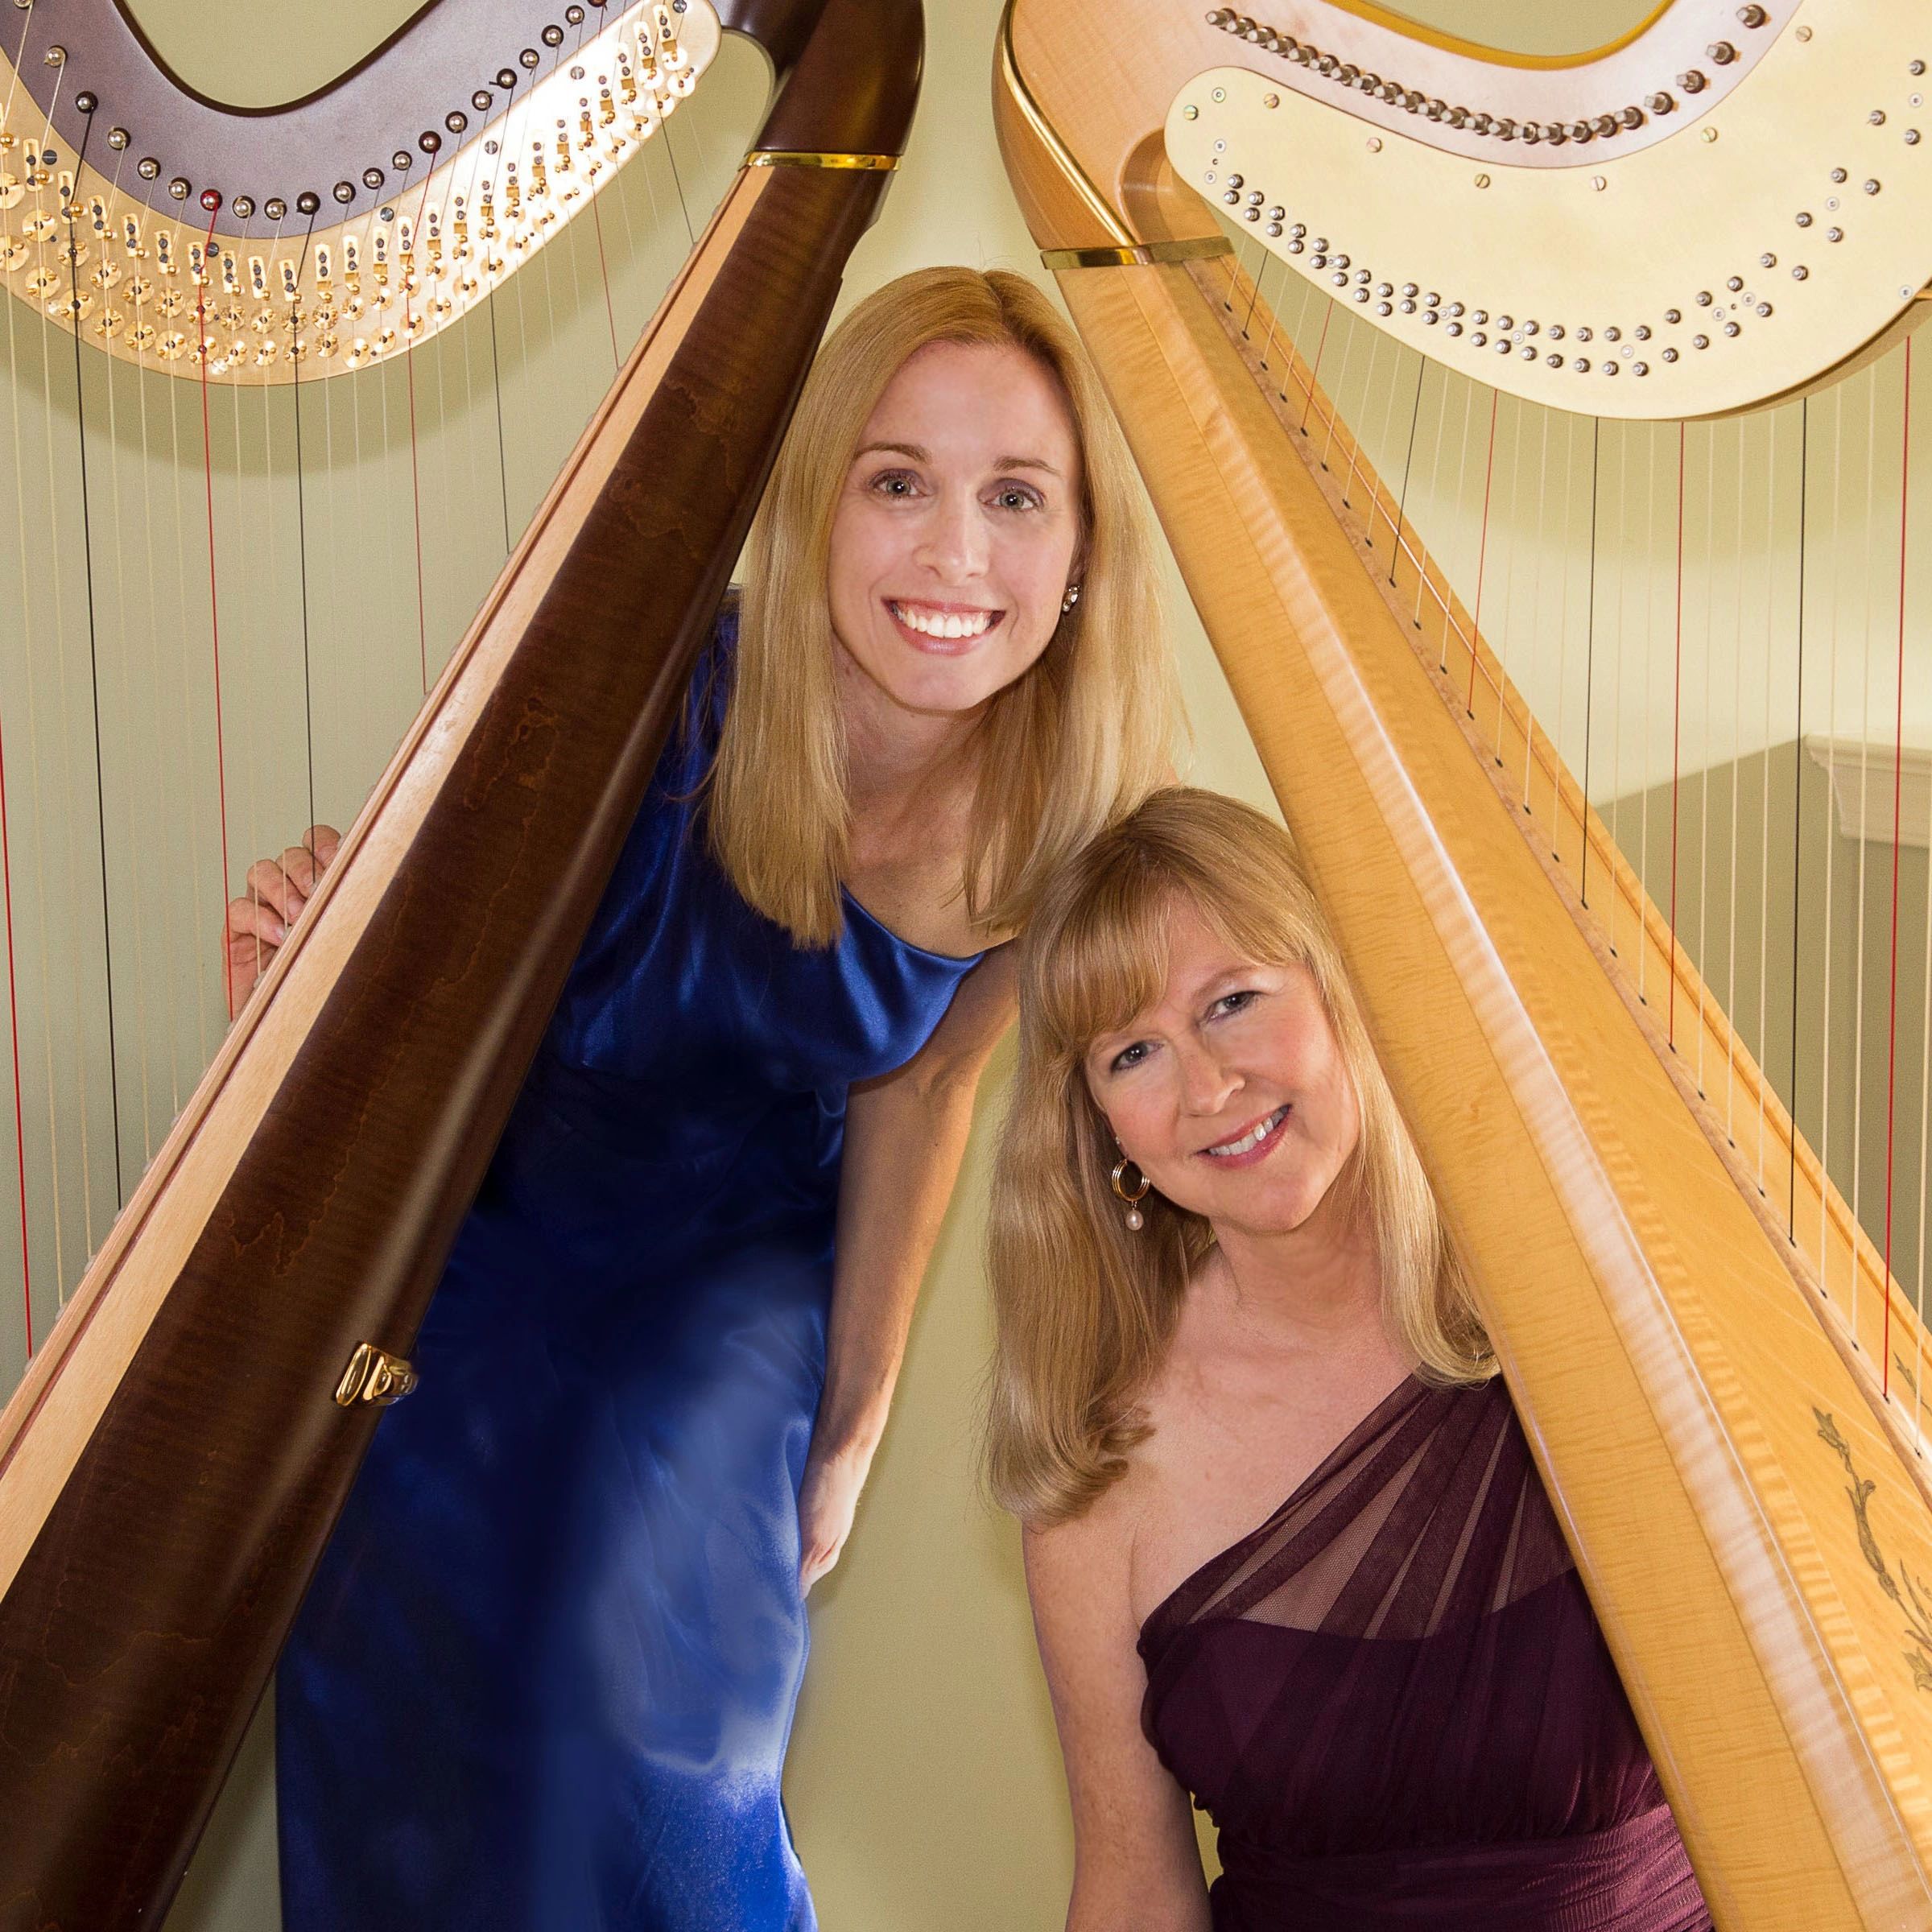 Principally Harps is the harp duo of Mindy Cutcher and Janet Witman